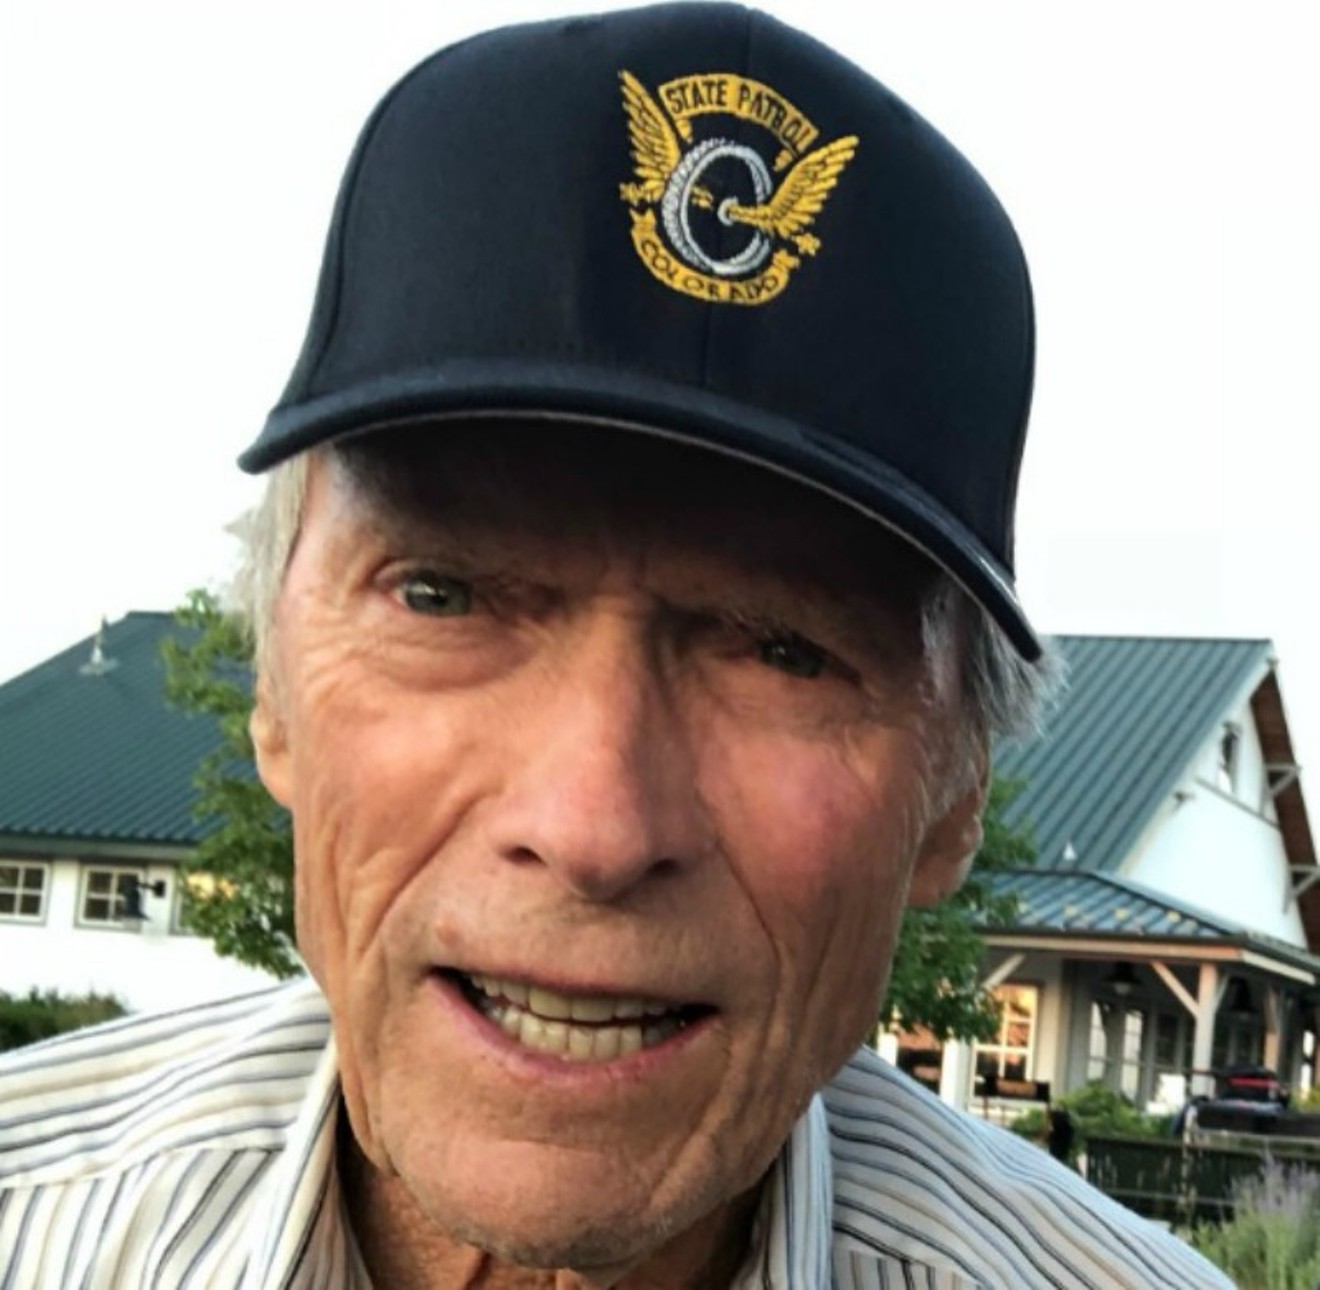 Clint Eastwood sporting a Colorado State Patrol cap during his visit to Colorado.